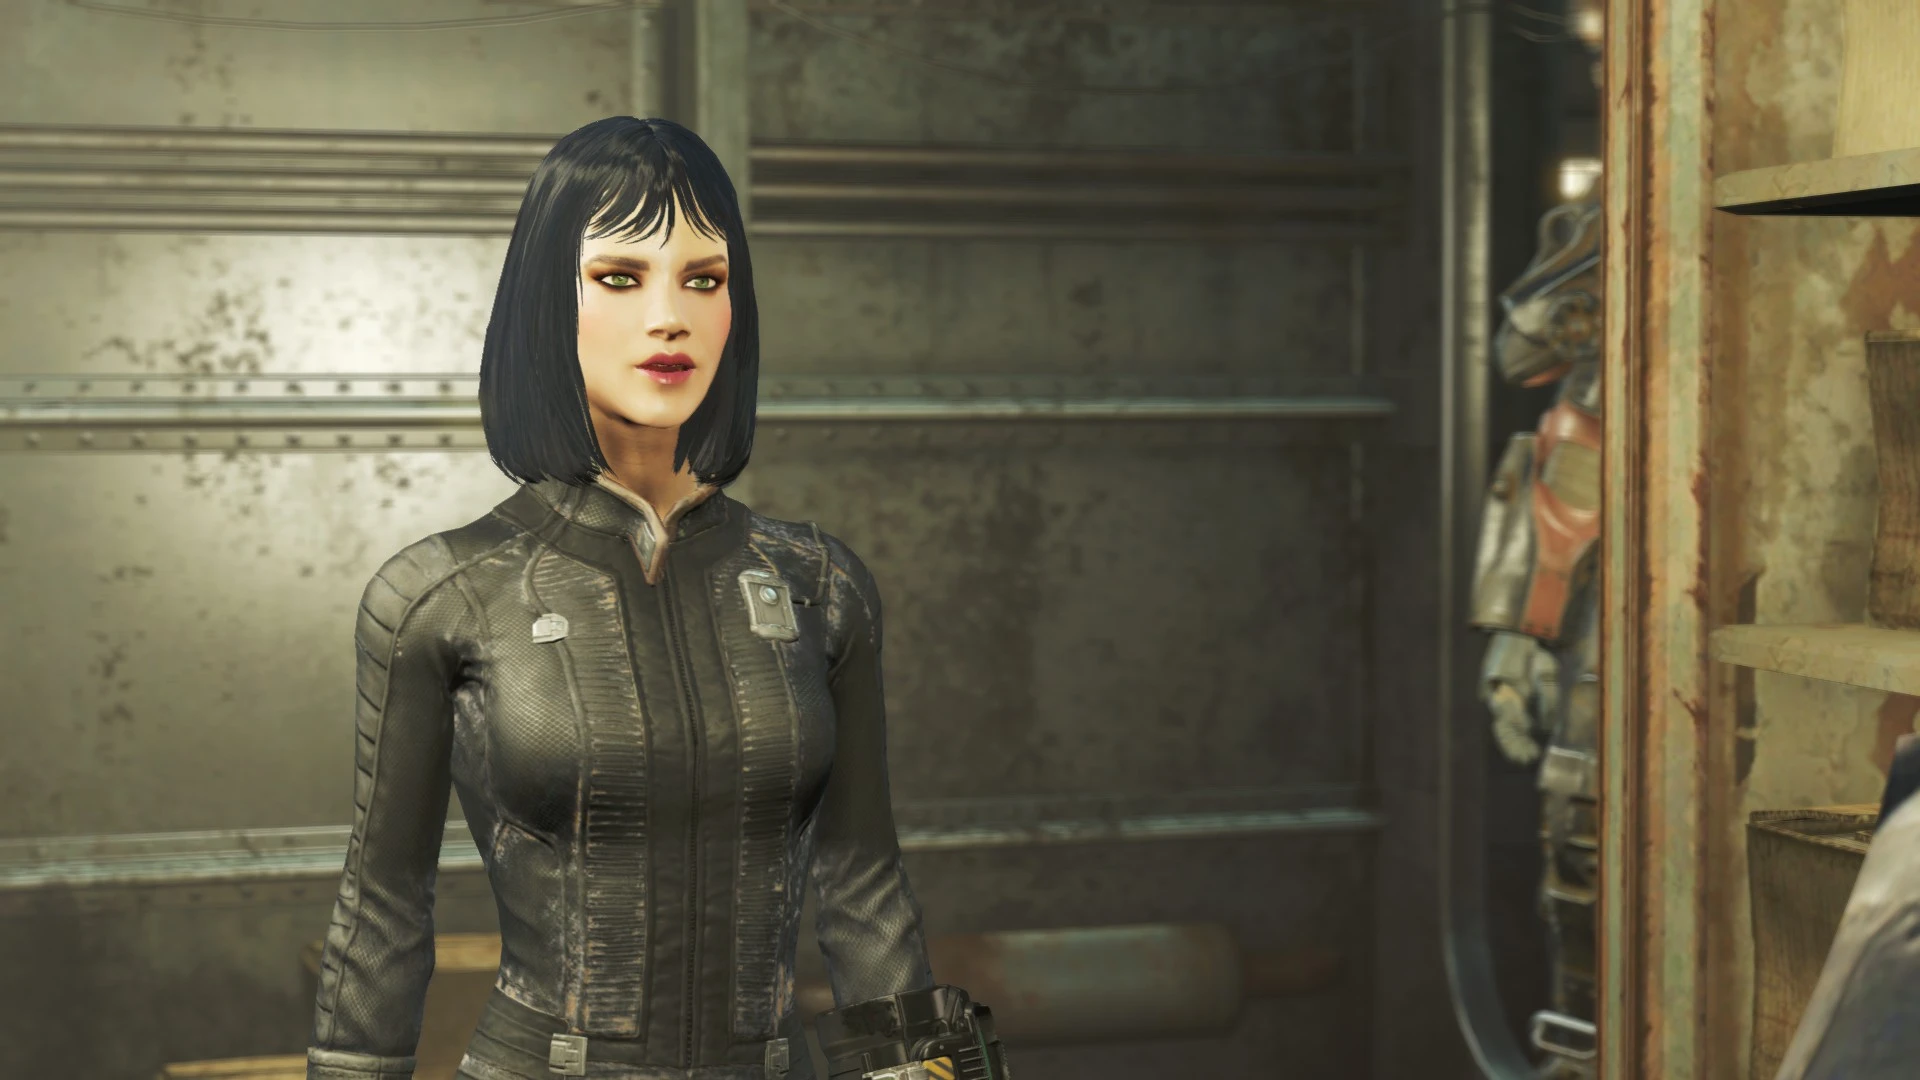 New Vault 111 suit is all black & sexy.